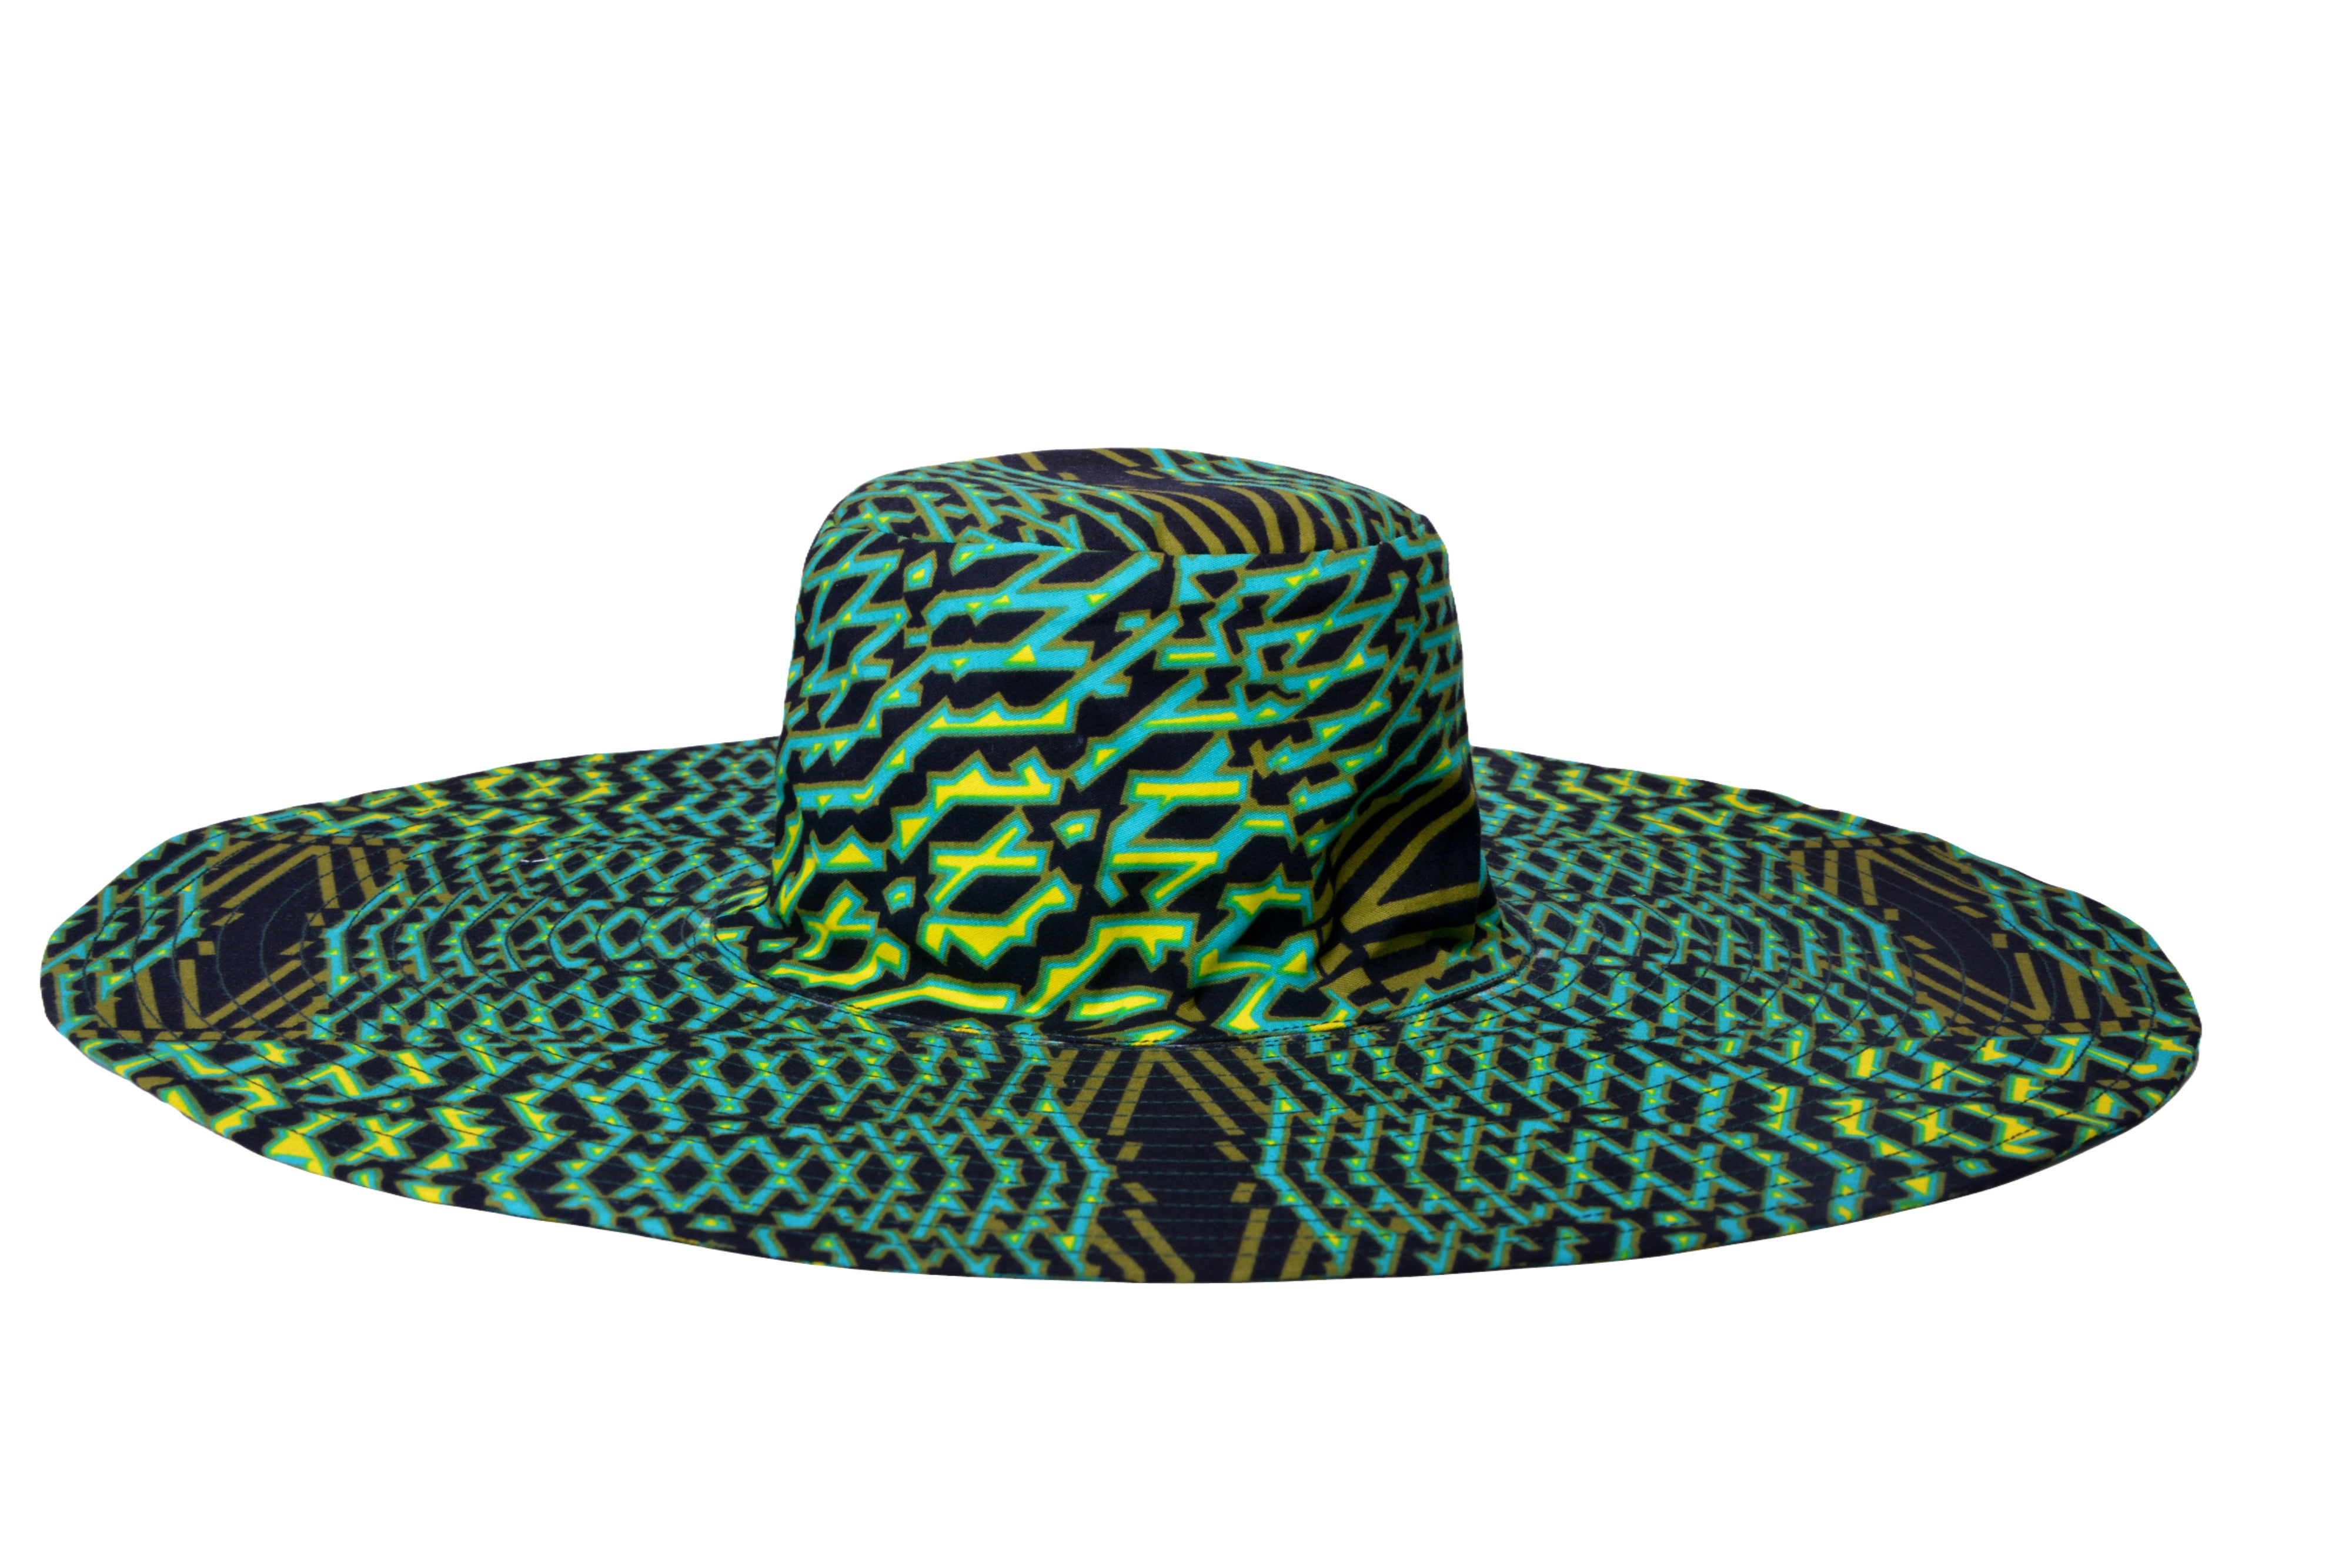 Jollo Ccm Modern African Hat: let comfort and style give you the best shade.